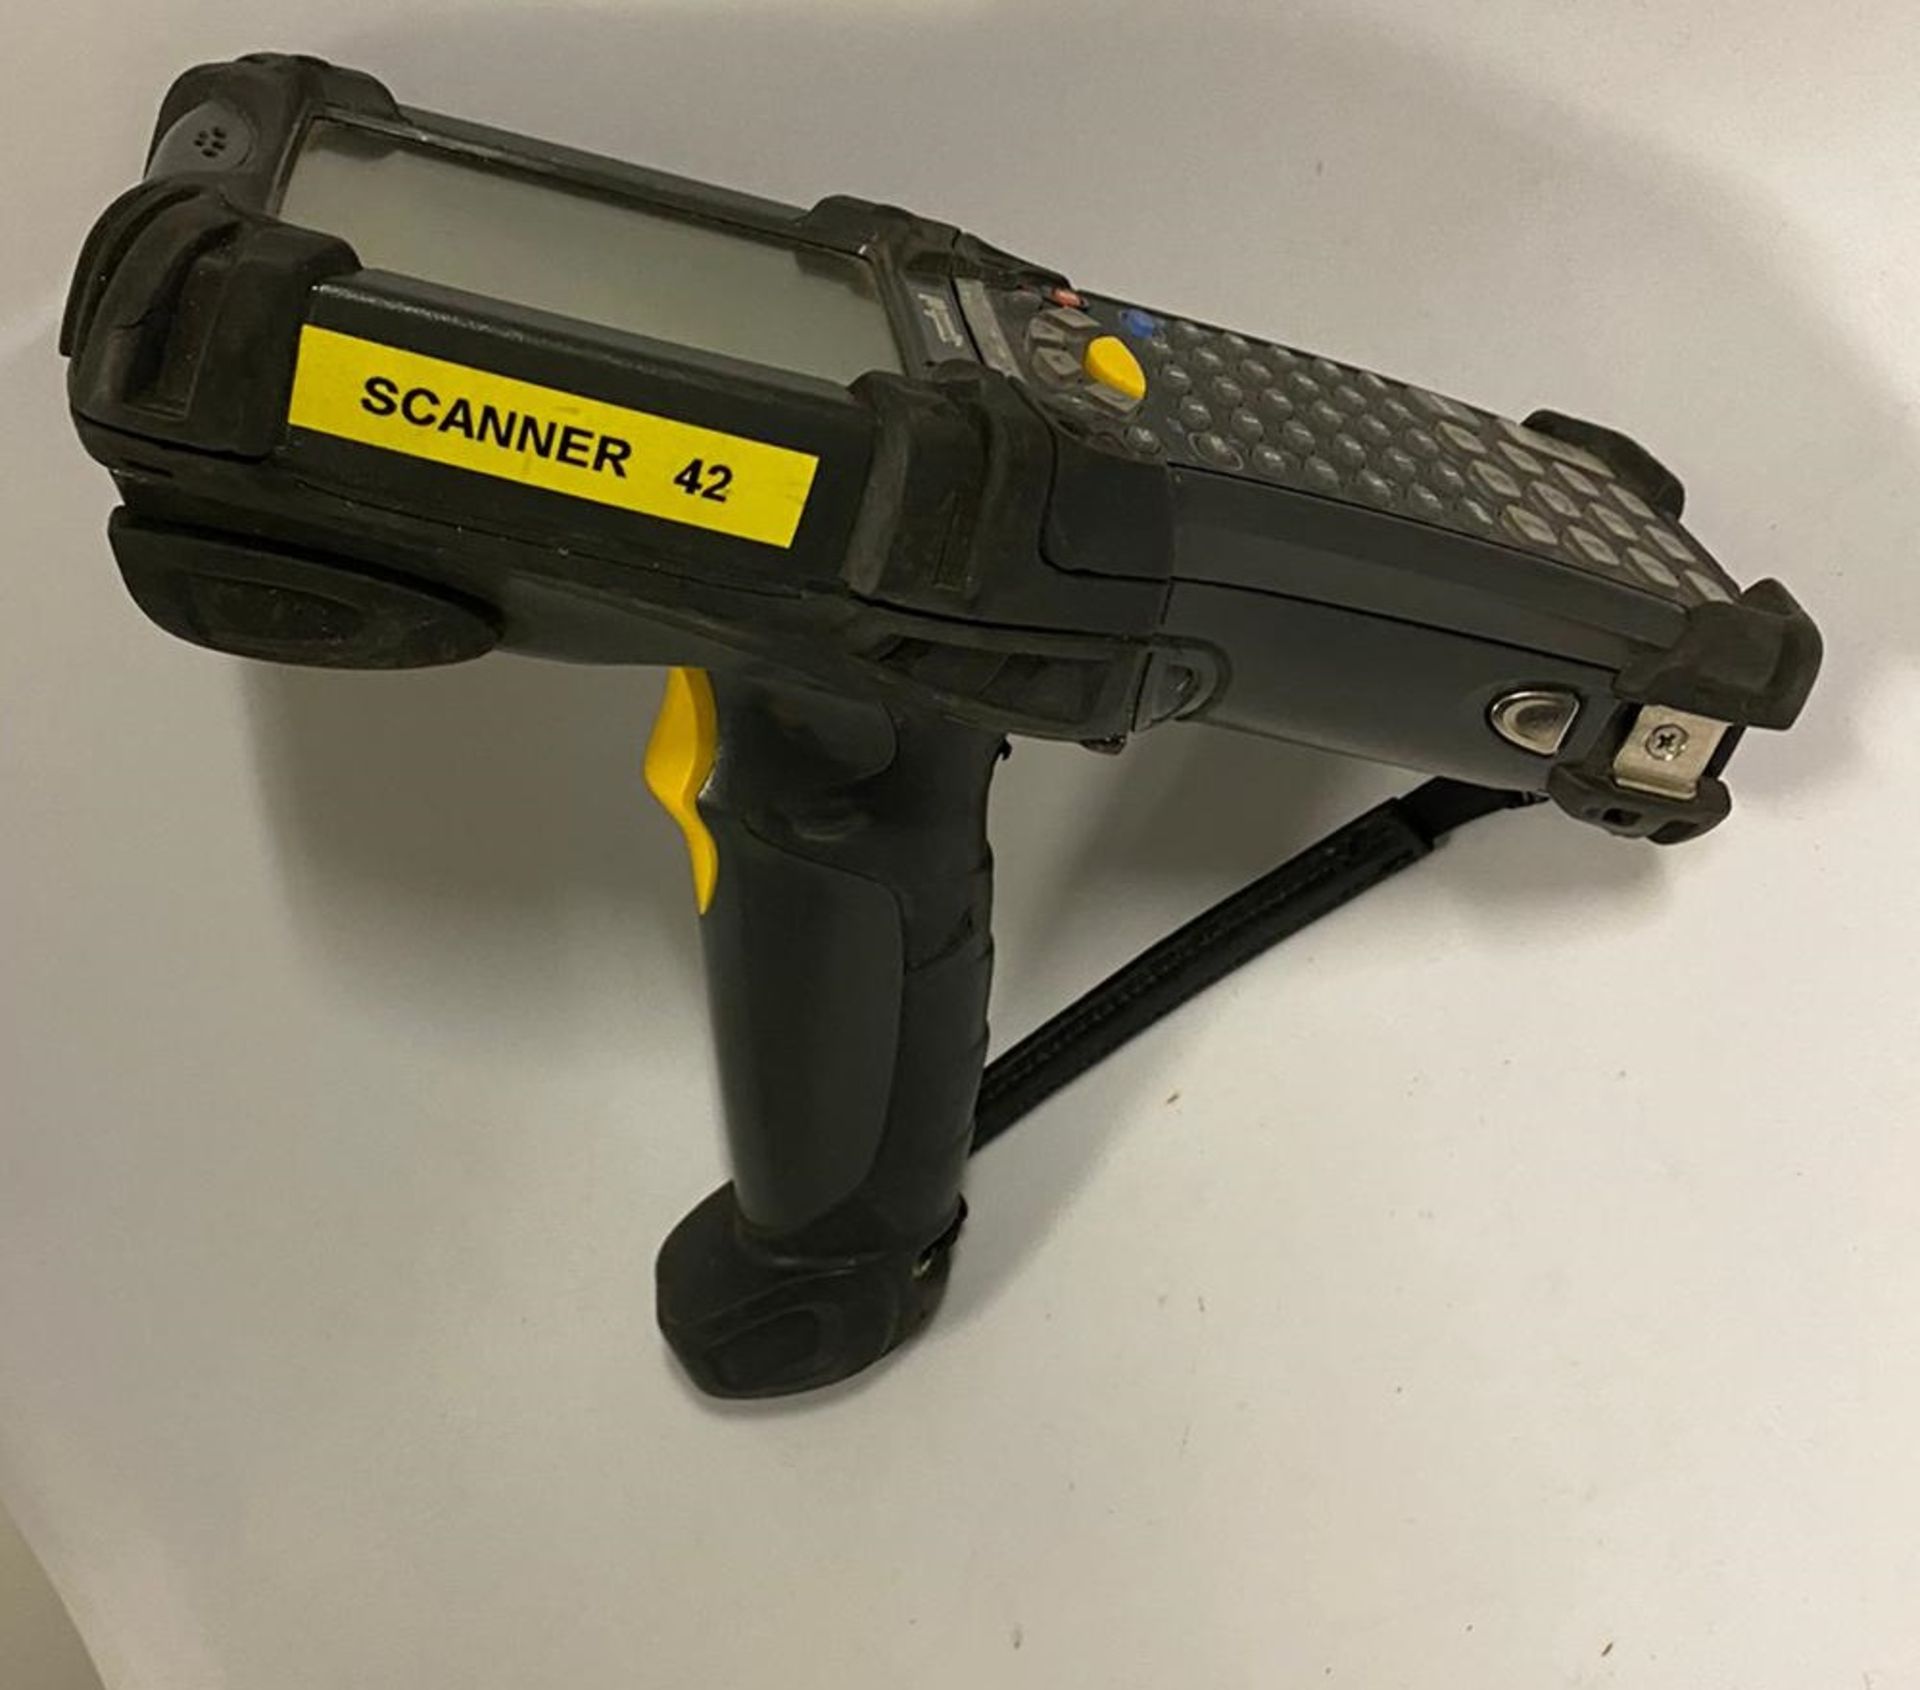 1 x Symbole MC9010 Mobile Barcode Scanner - Used Condition (See Below) - Location: Altrincham WA14 - Image 6 of 6